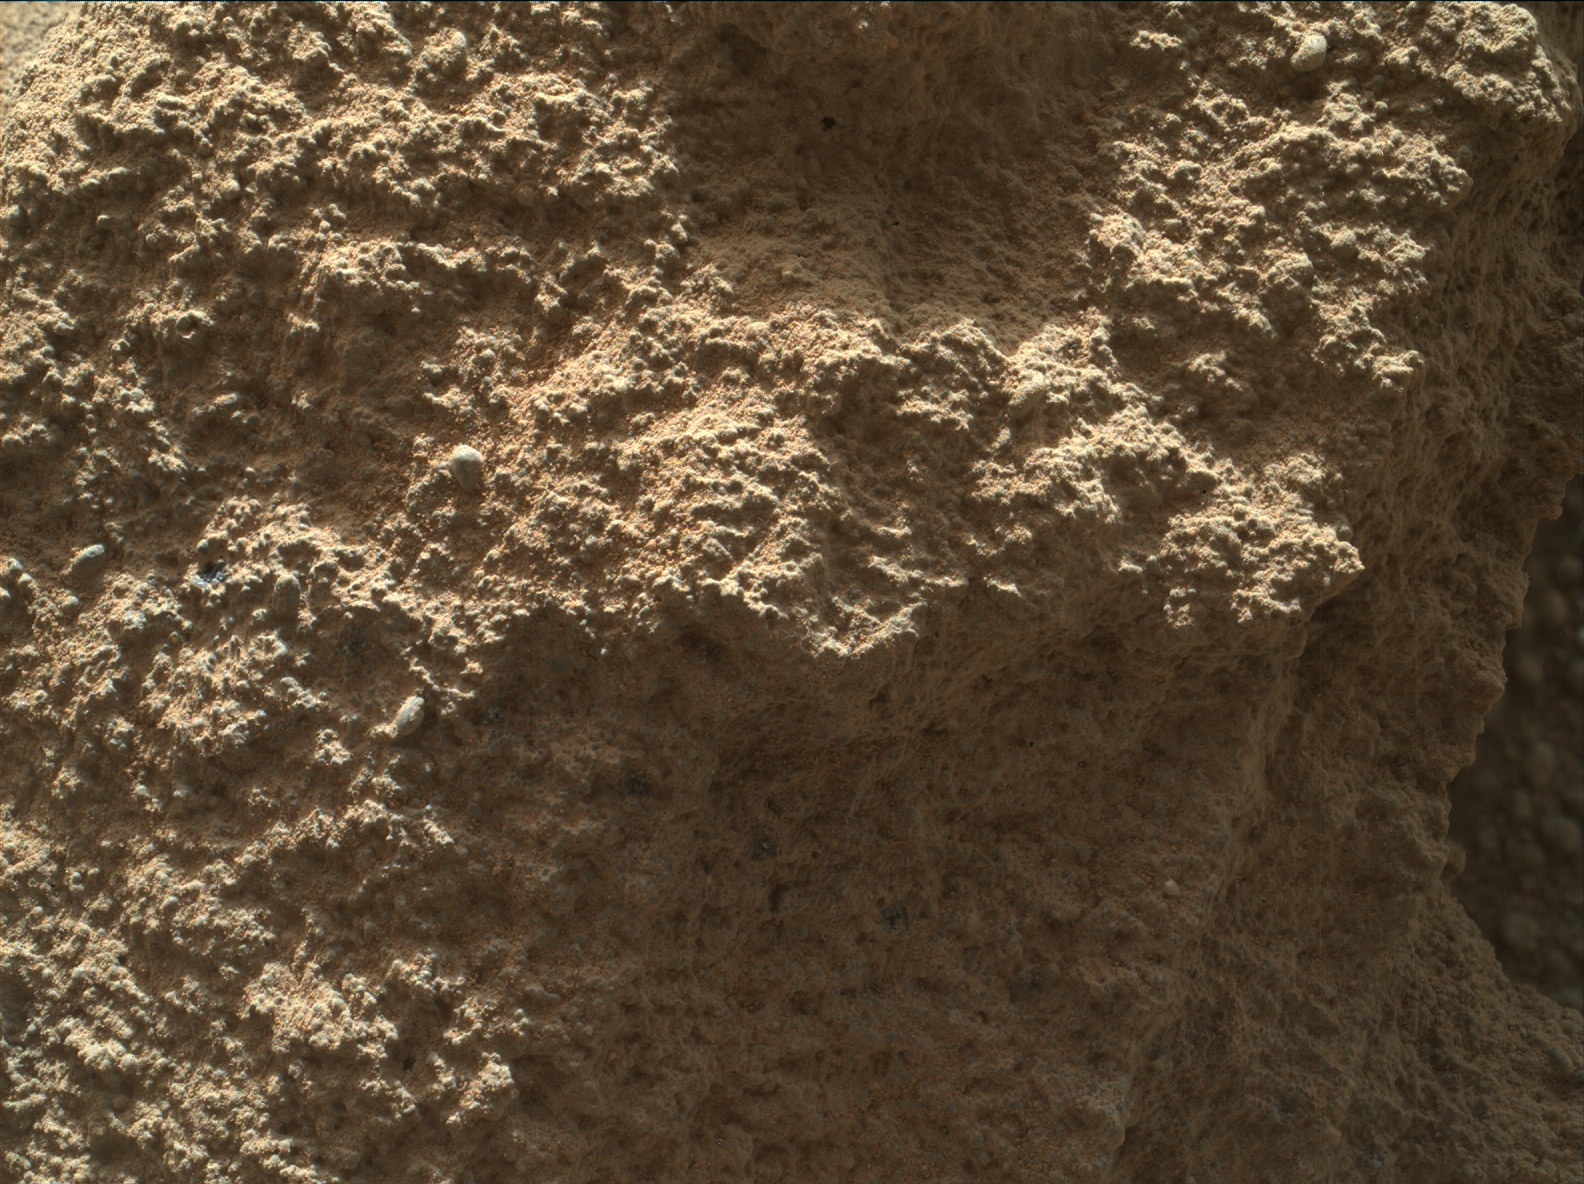 Nasa's Mars rover Curiosity acquired this image using its Mars Hand Lens Imager (MAHLI) on Sol 1295